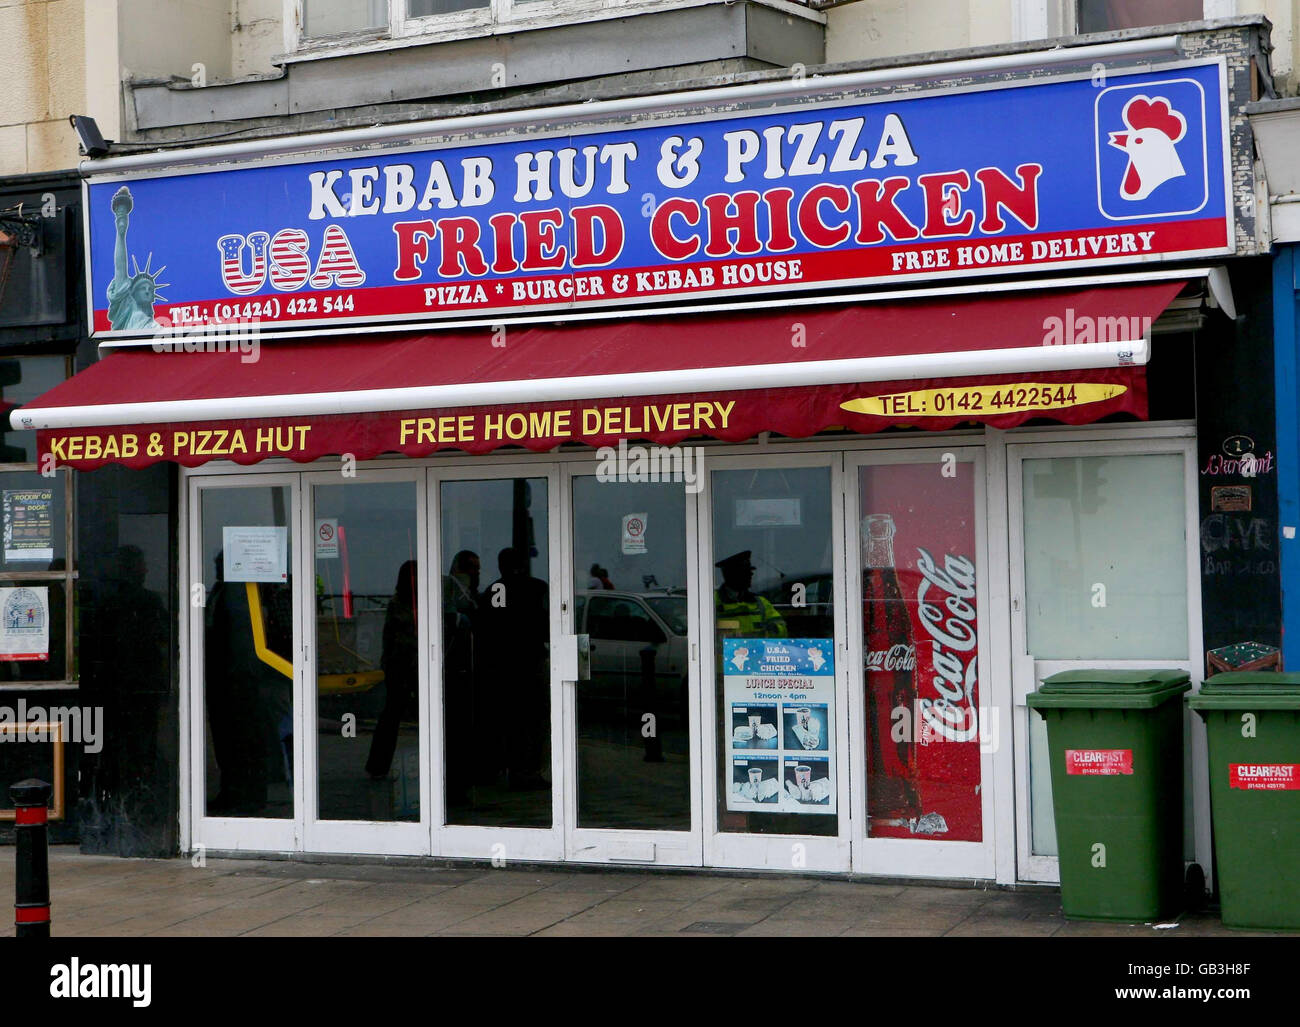 A general view of USA Fried Chicken in Hastings, East Sussex, where Mohammed Al-Majed, 16, from Qatar, suffered a serious head injury during an assault outside the takeaway in what is believed to be a racially motivated attack. Stock Photo